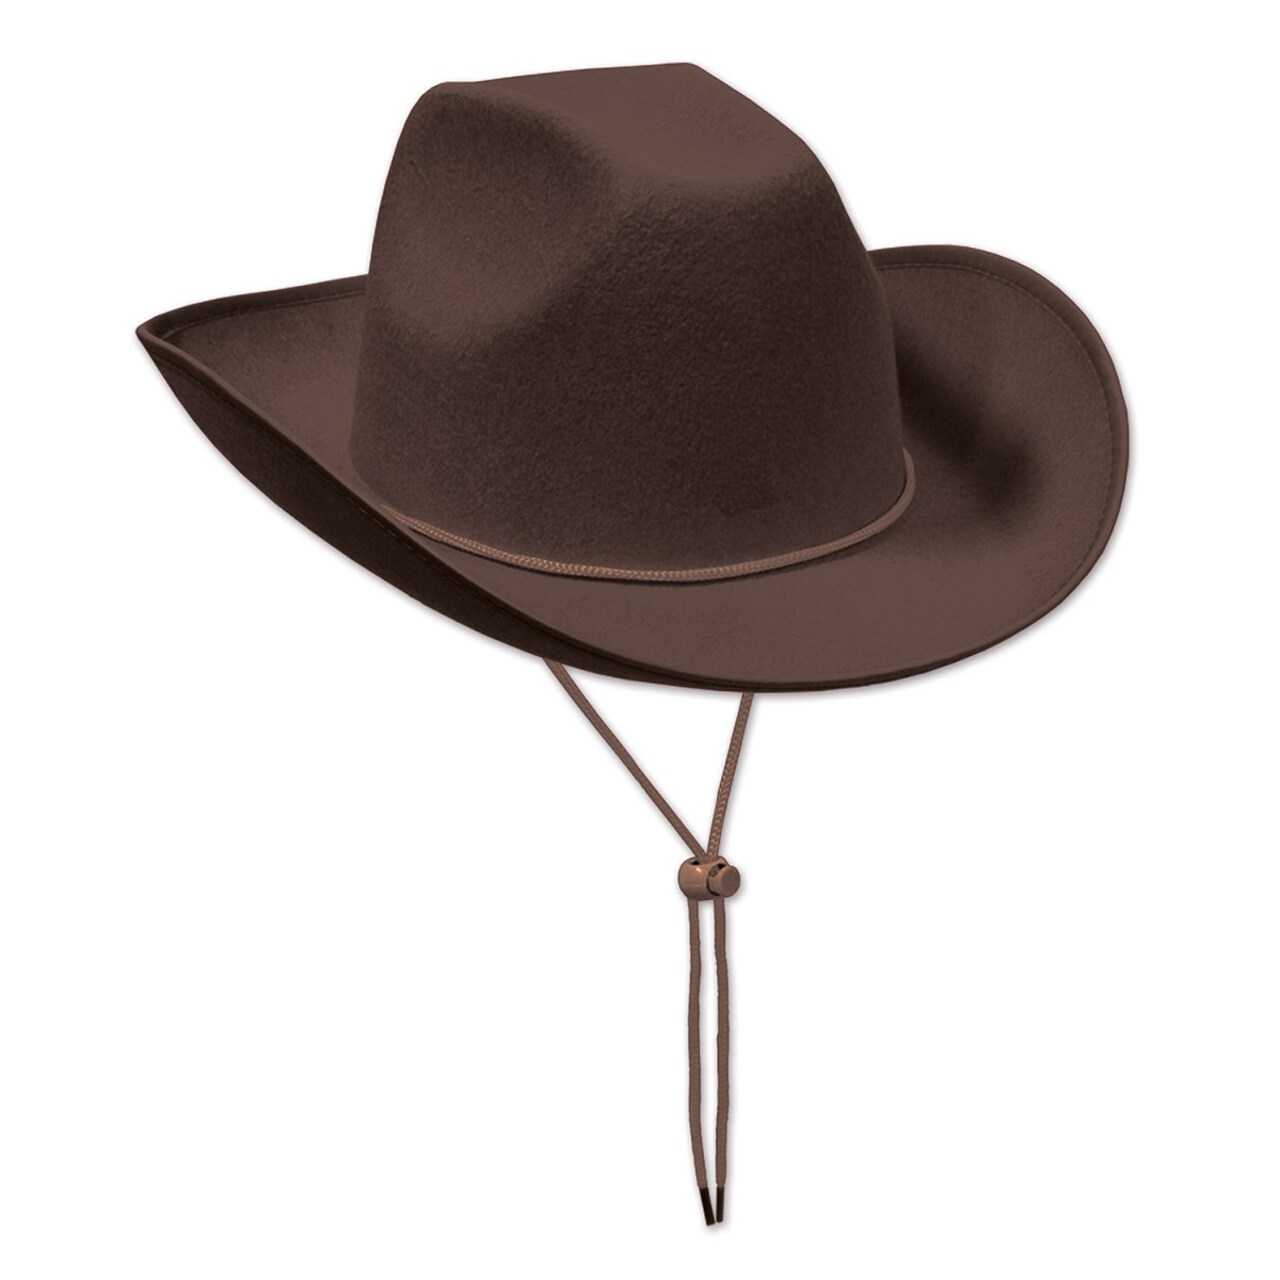 Accessories Costume Cowboy, Different Style Cowboy Hats